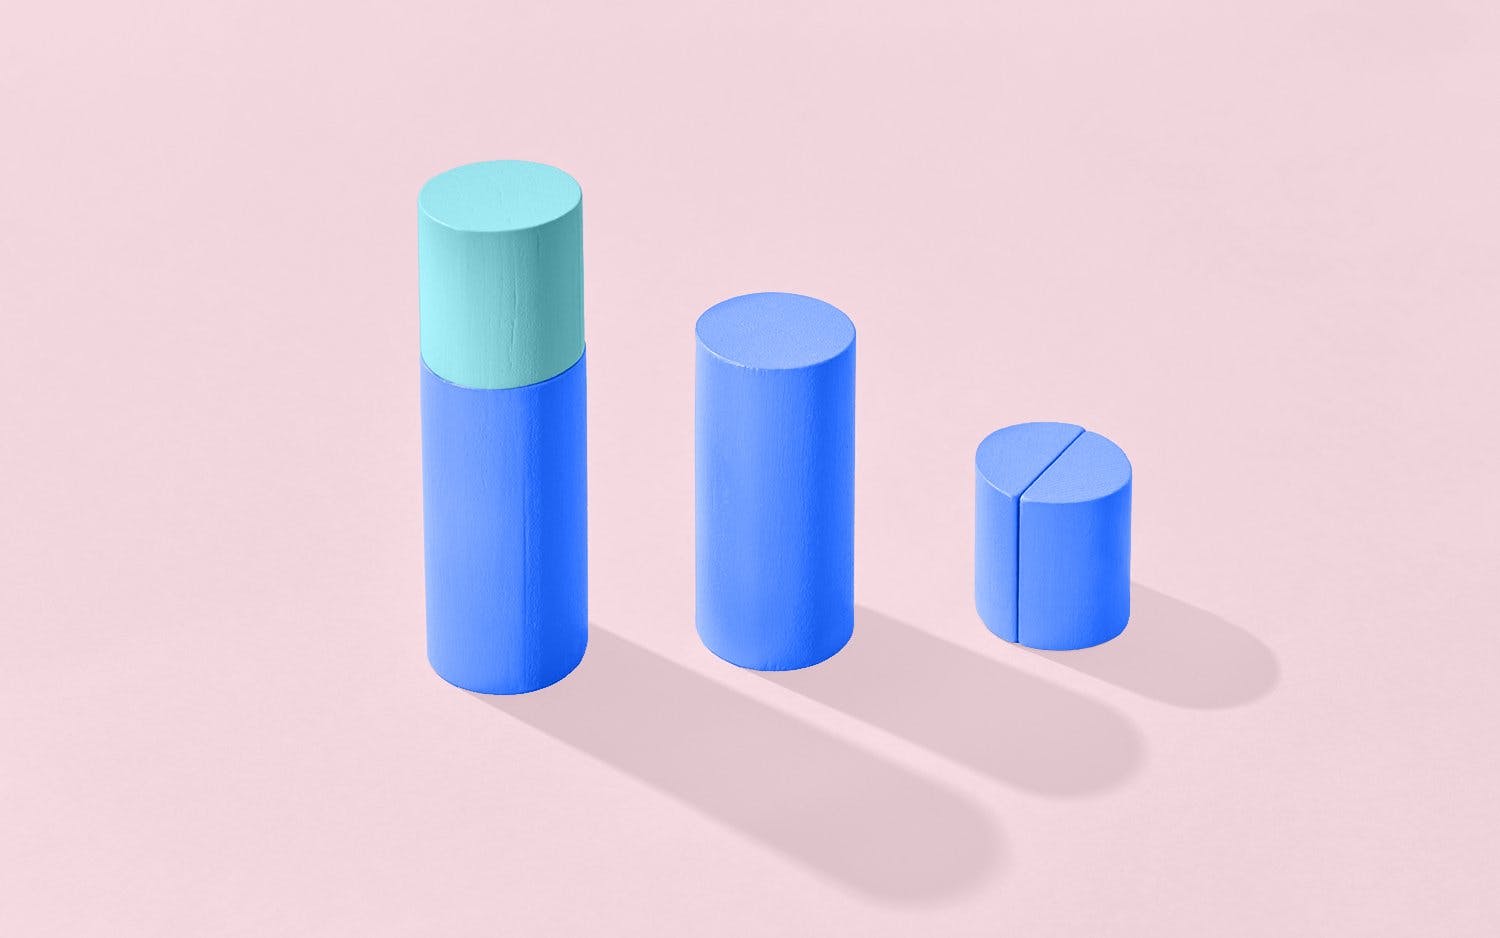 Three bars next to each other depicting a graph